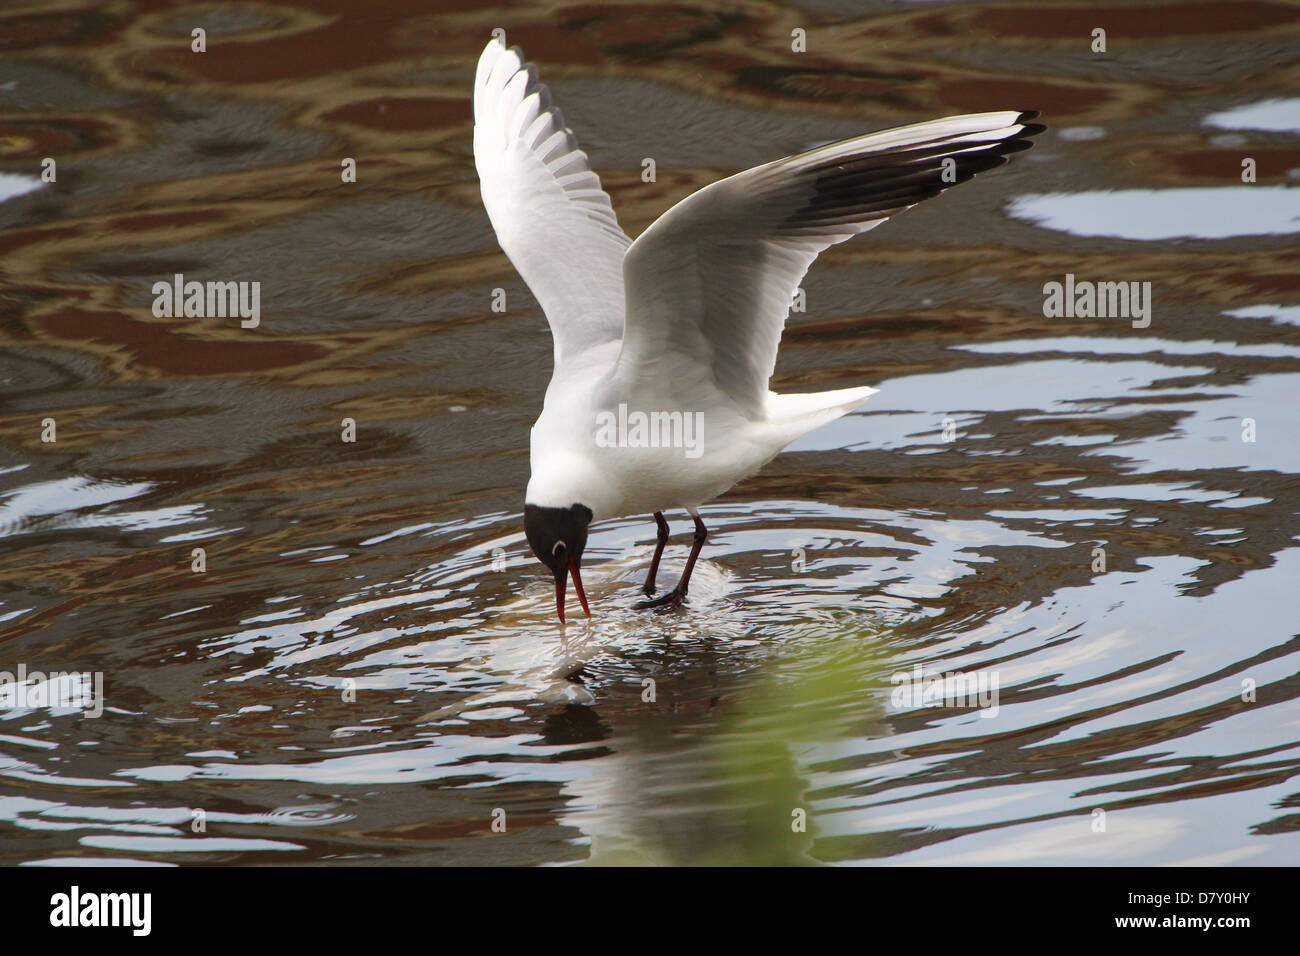 Adult Black-headed Gull (Chroicocephalus ridibundus) eating a large dead fish floating in the water (12 images in the series) Stock Photo